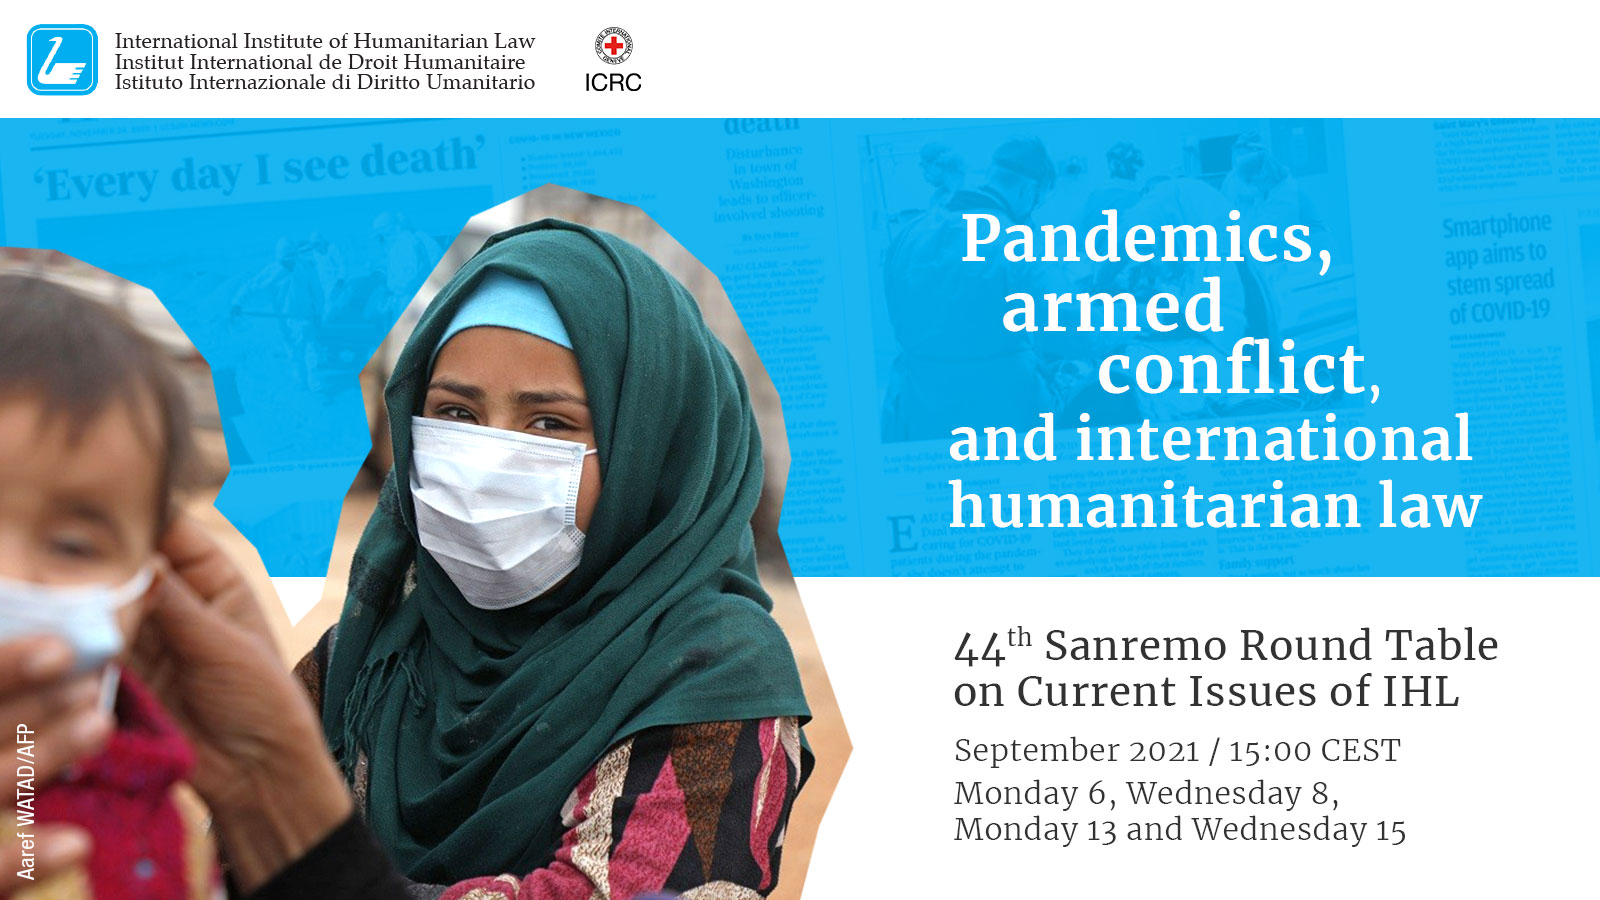 44<sup>th</sup> Sanremo Round Table on “Pandemics, armed conflict, and international humanitarian law”- Registration for the webinars is open